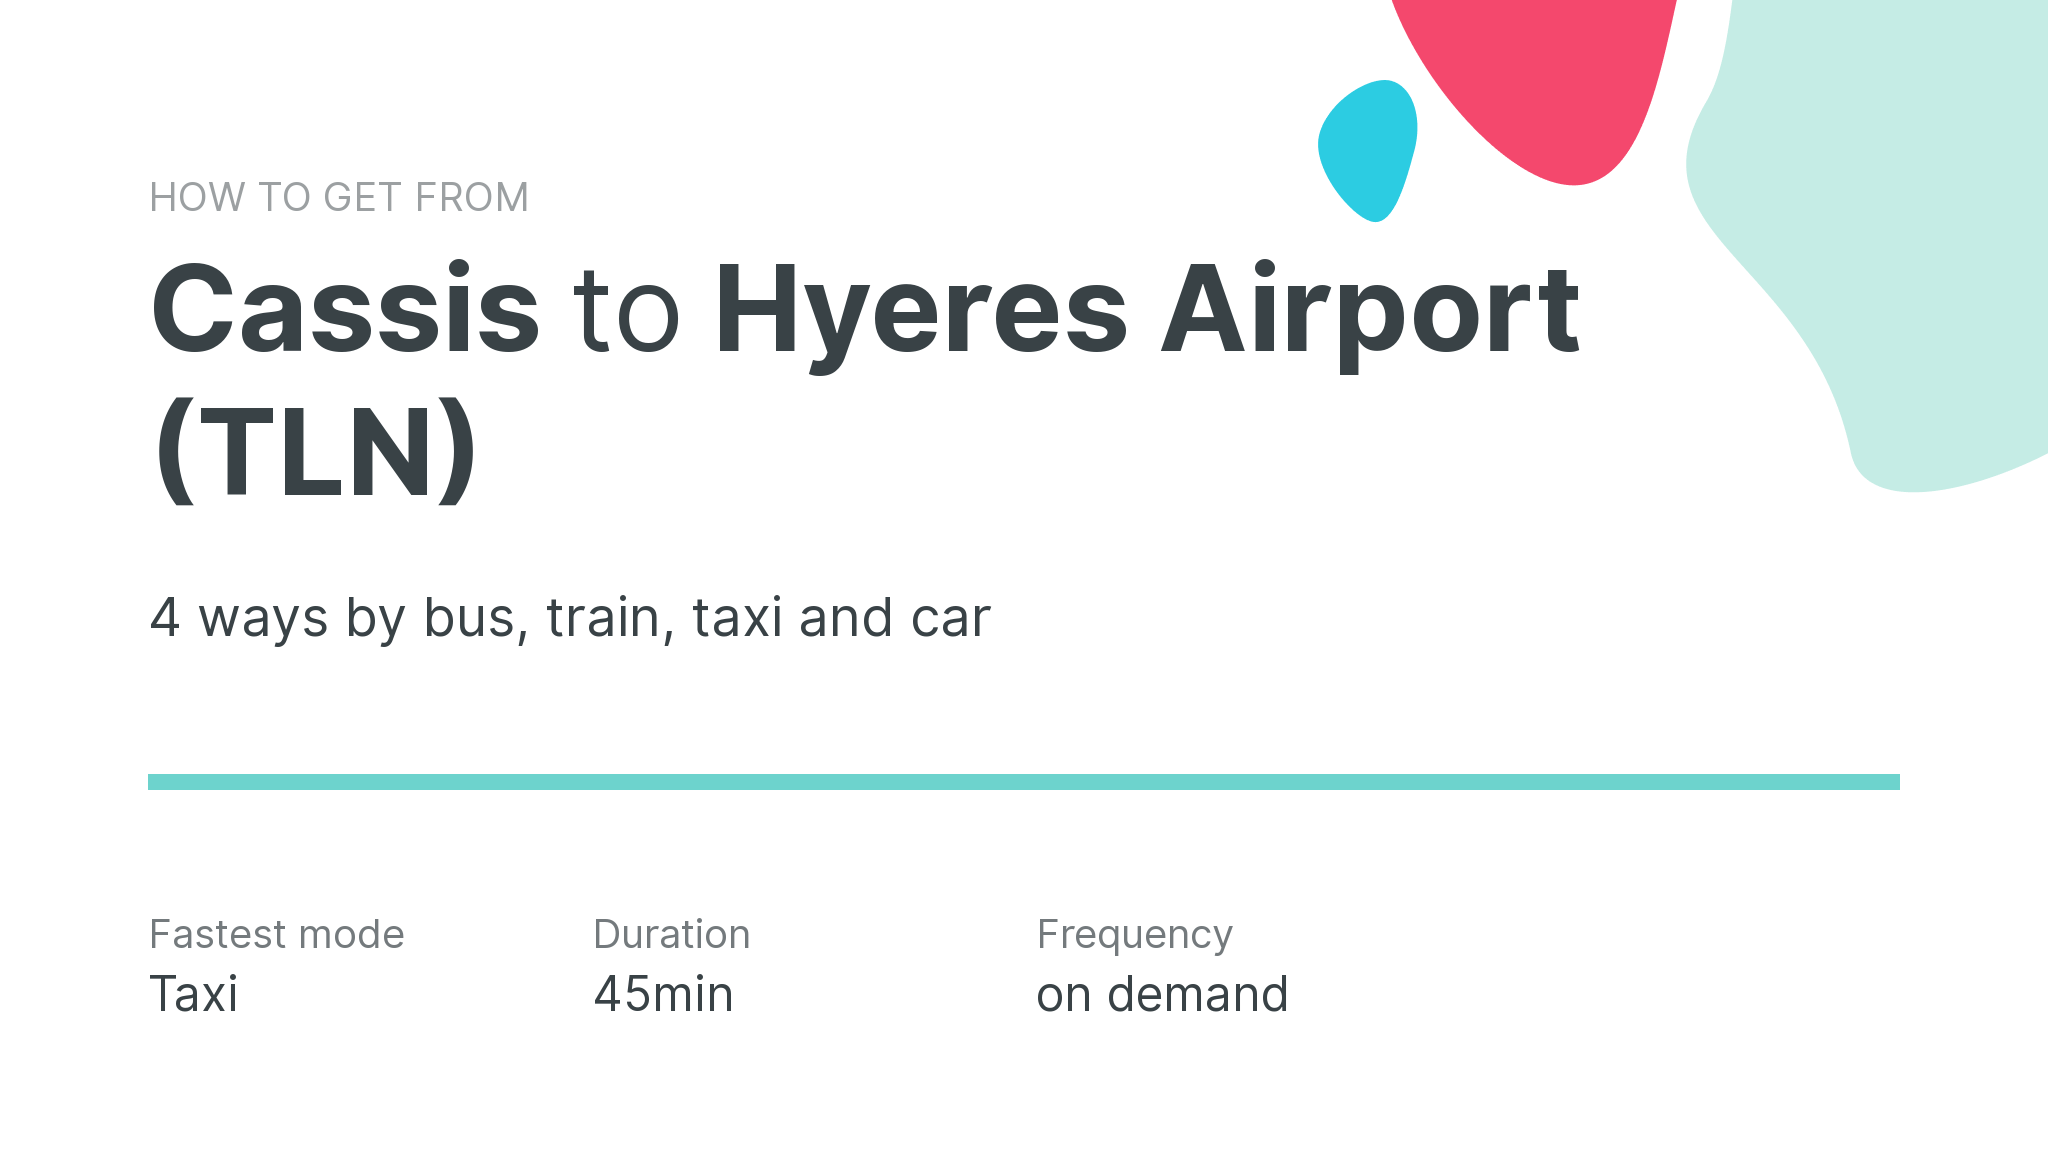 How do I get from Cassis to Hyeres Airport (TLN)